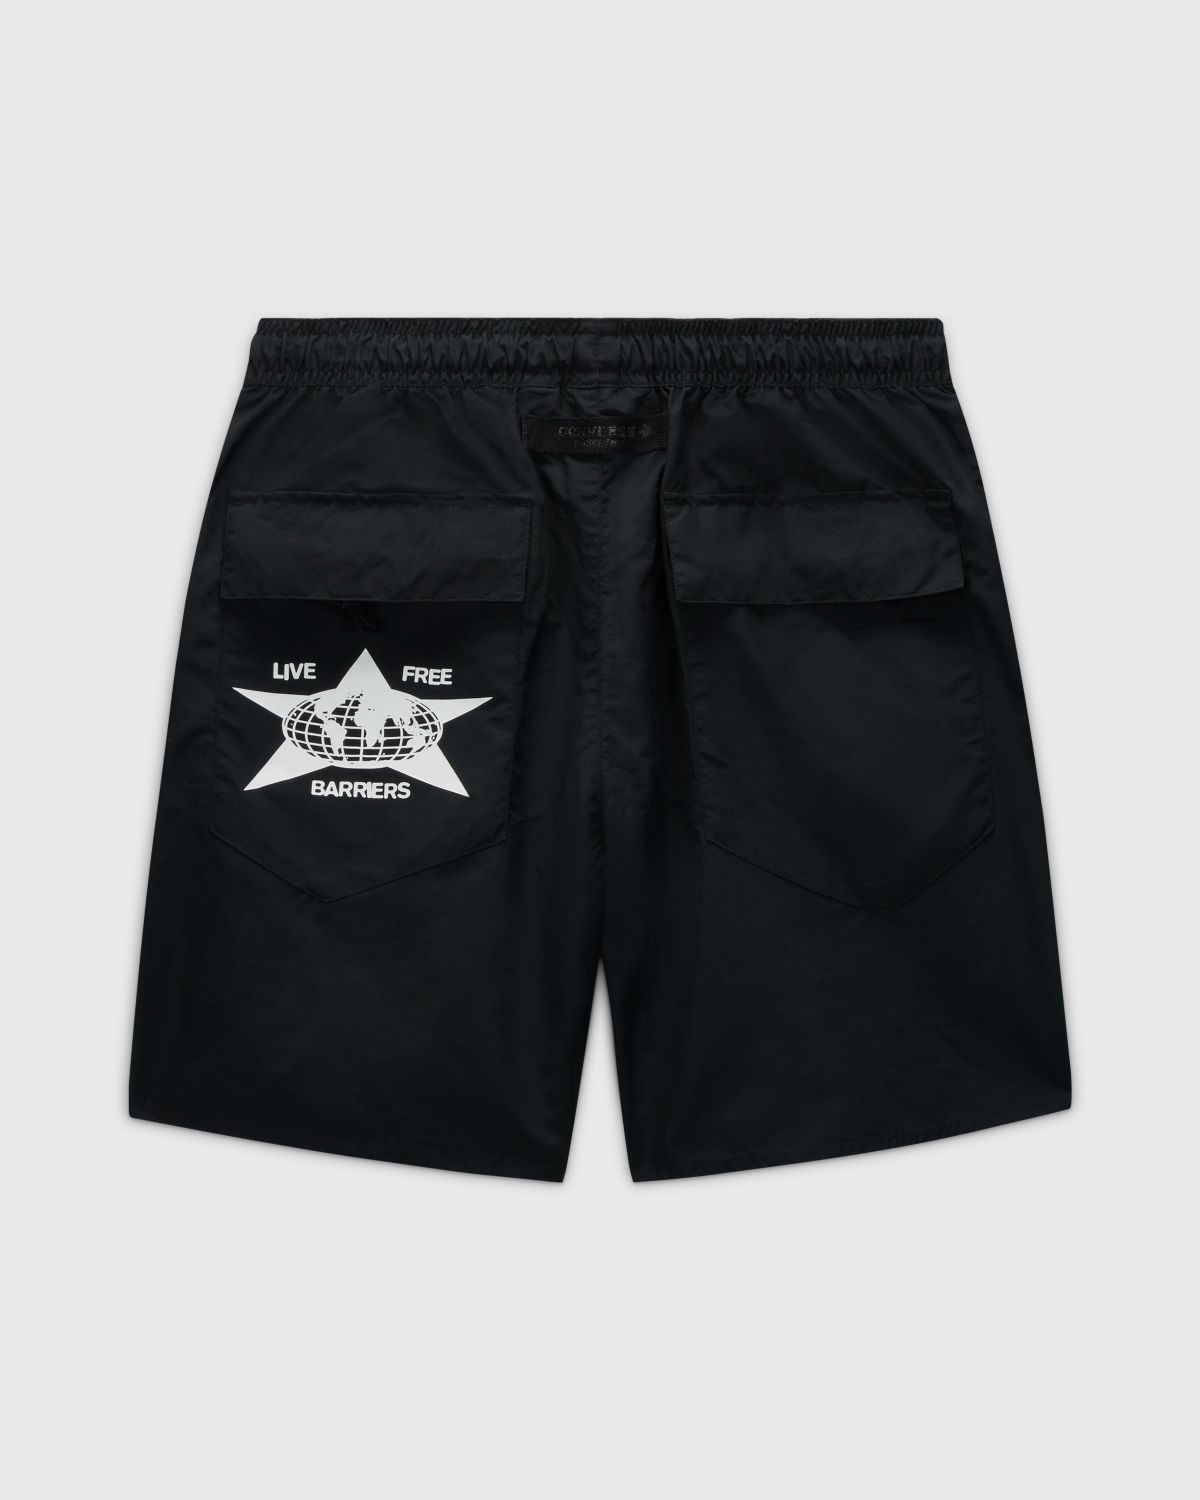 Converse x Barriers – Court Ready Cutter Shorts Black - Active Shorts - Black - Image 2